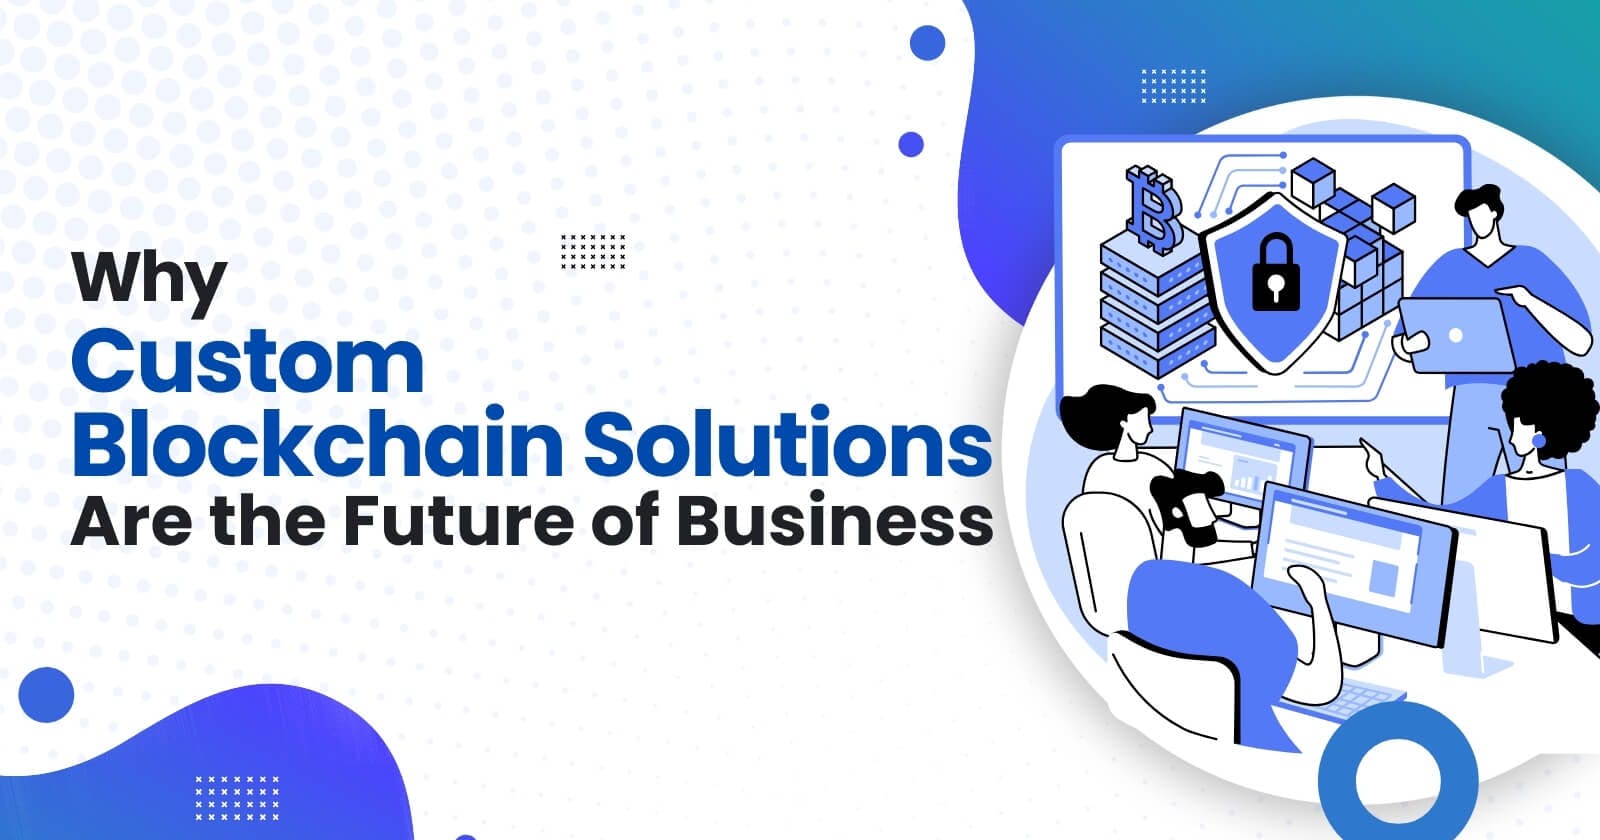 Why Custom Blockchain Solutions Are the Future of Business